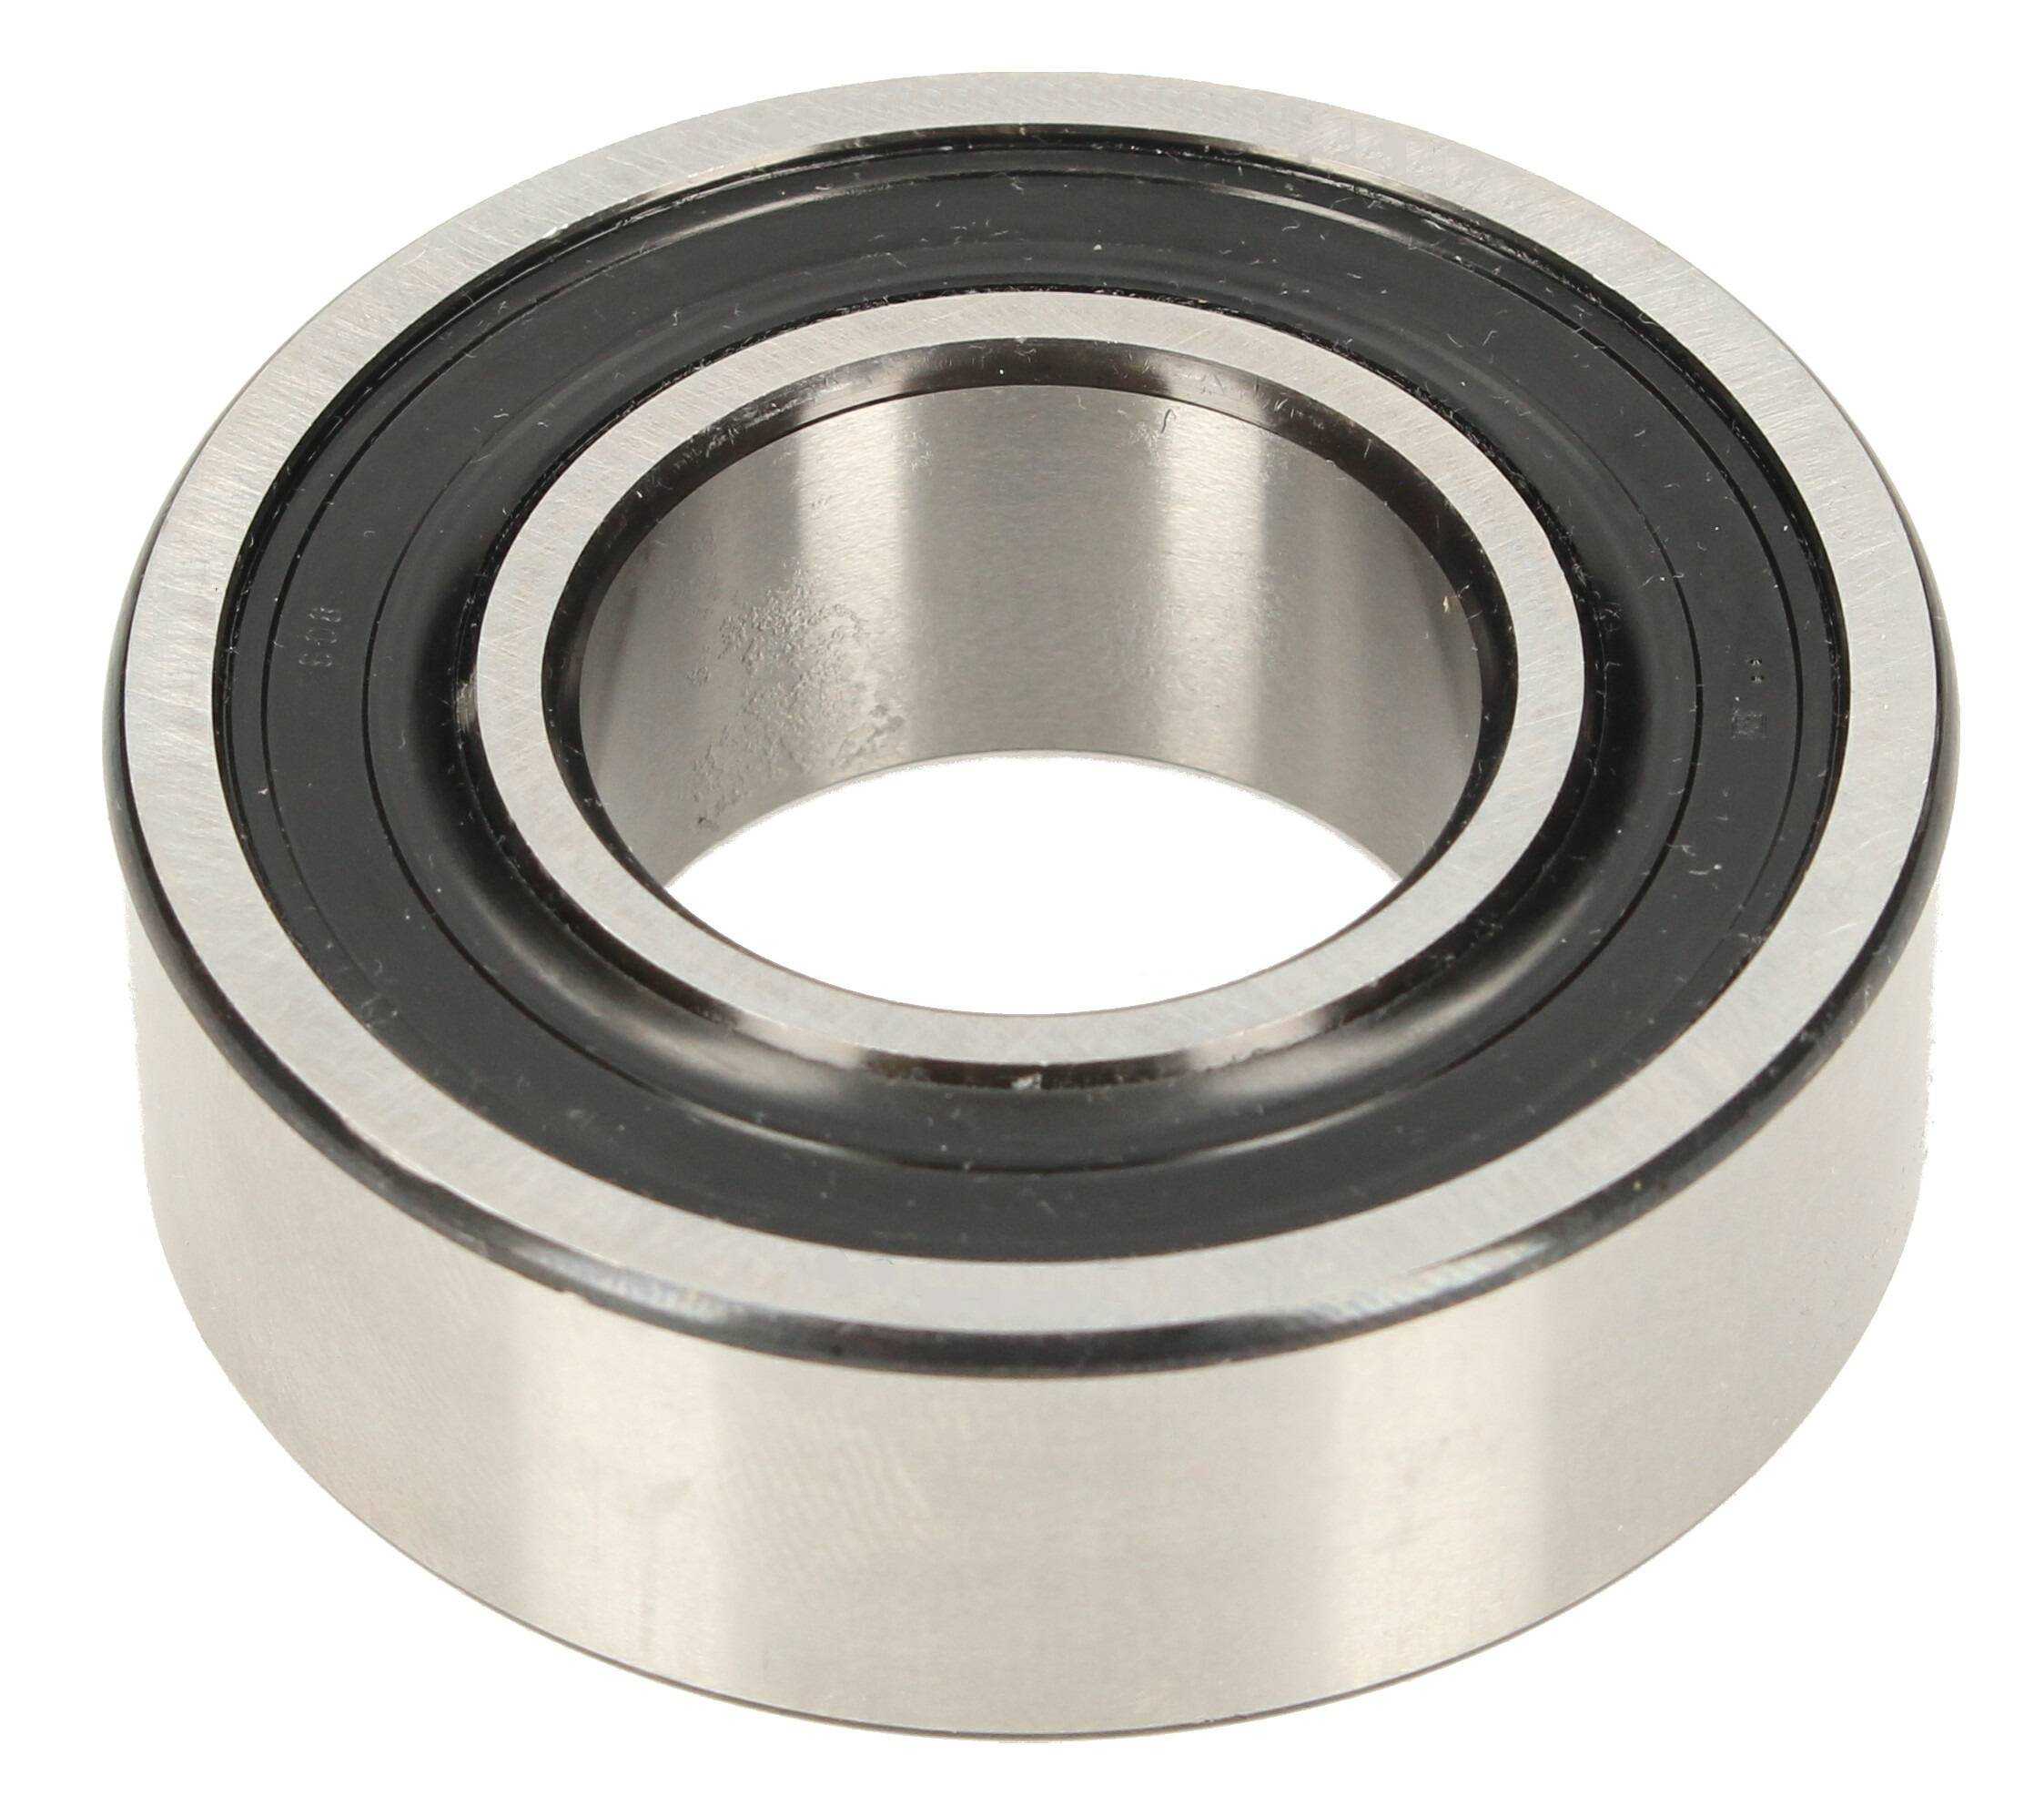 BALL BEARING 62302-RSR FAG (WITHOUT PACKAGING) - Image 1